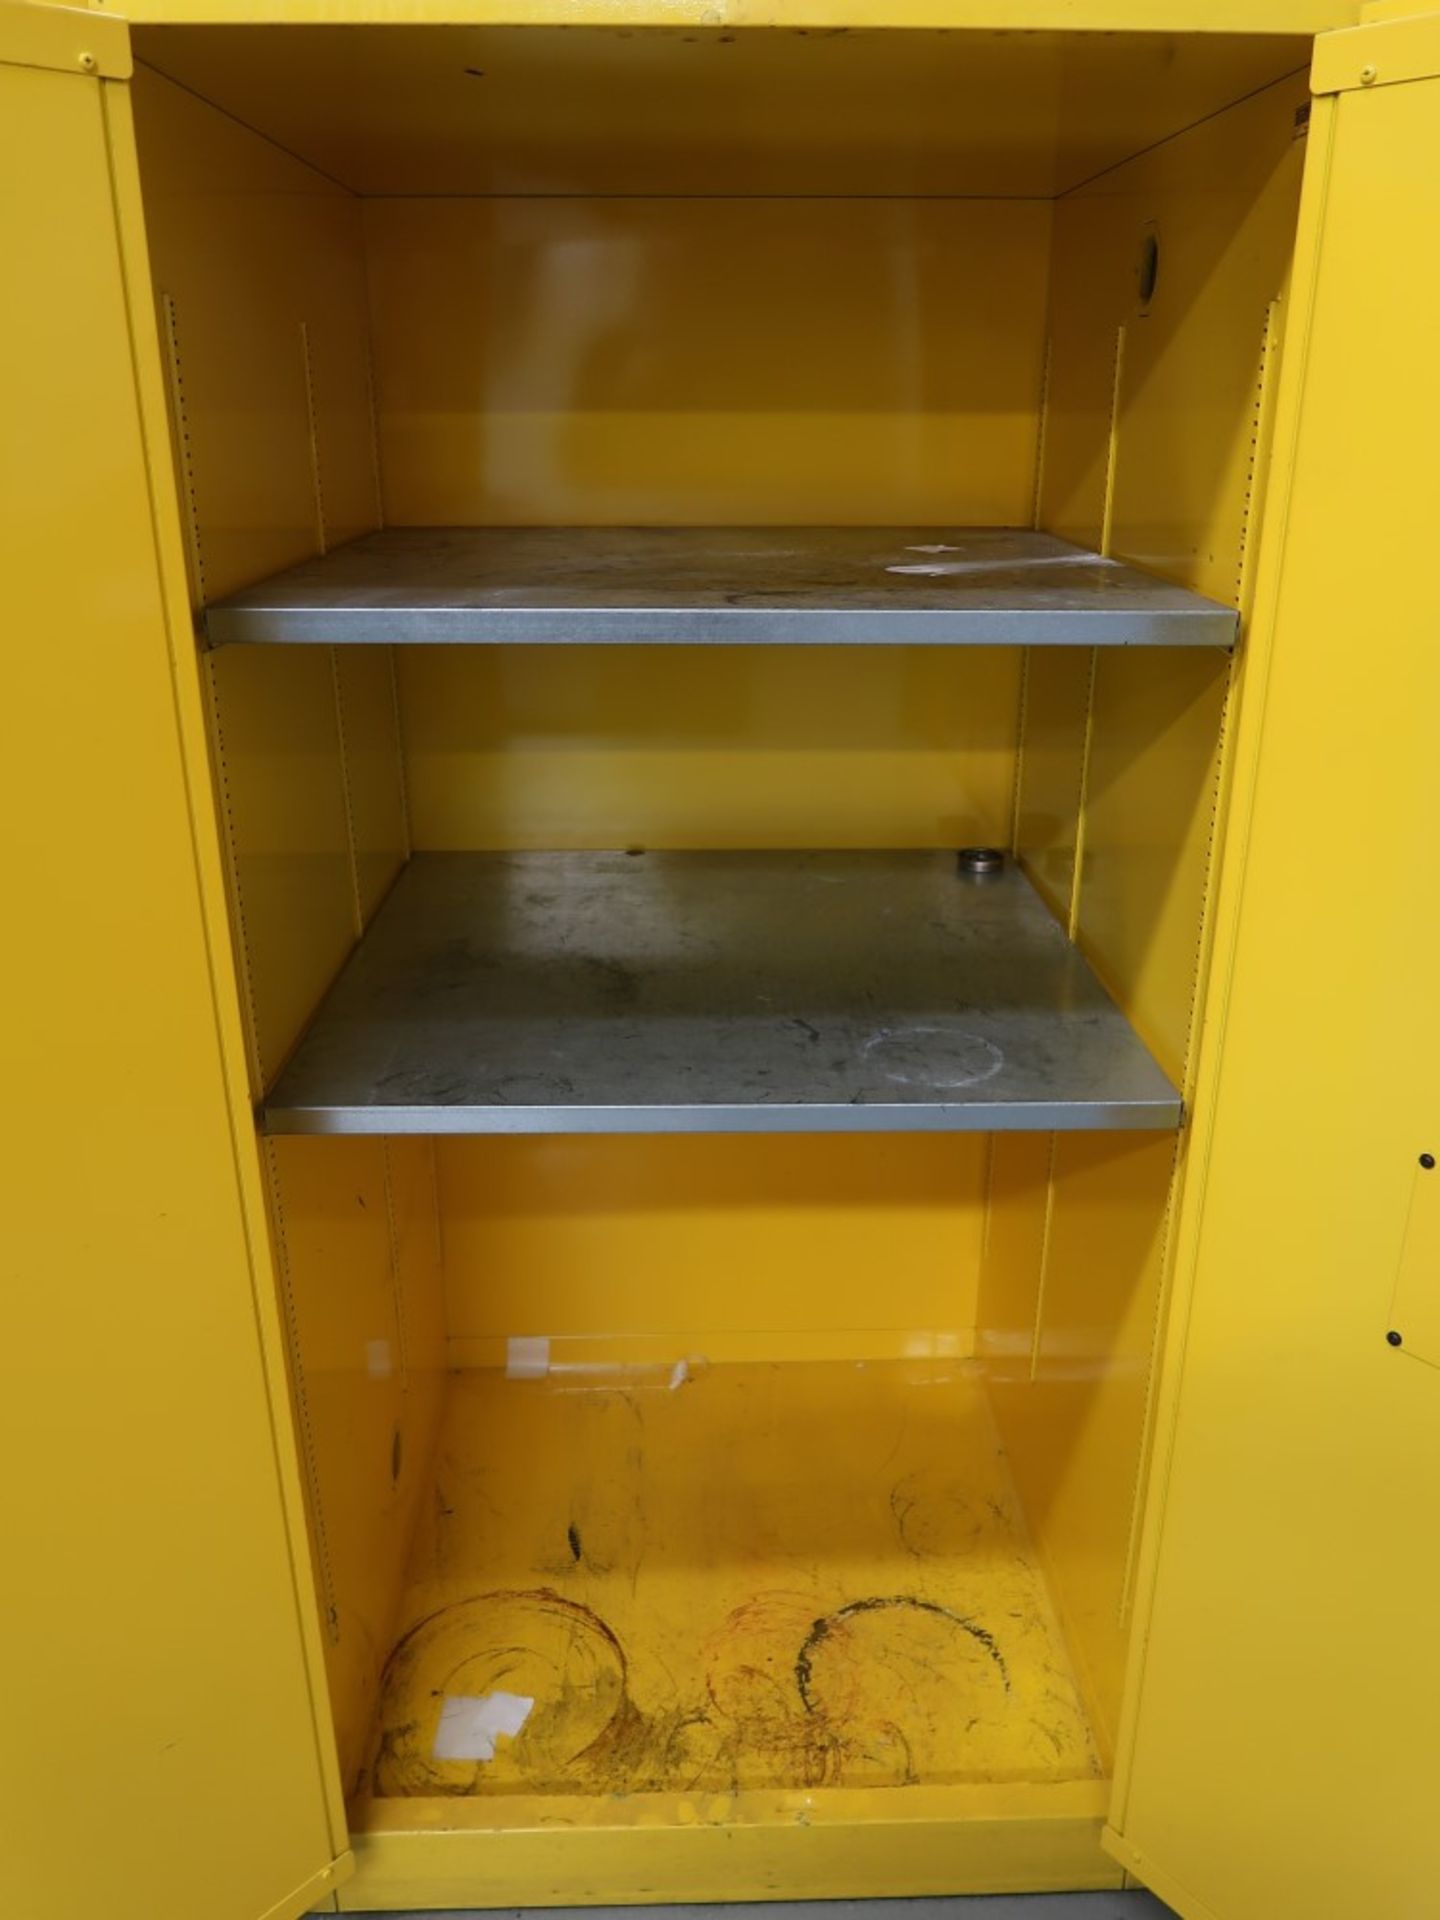 Securall Flammable Liquid Storage Cabinet - Image 3 of 3